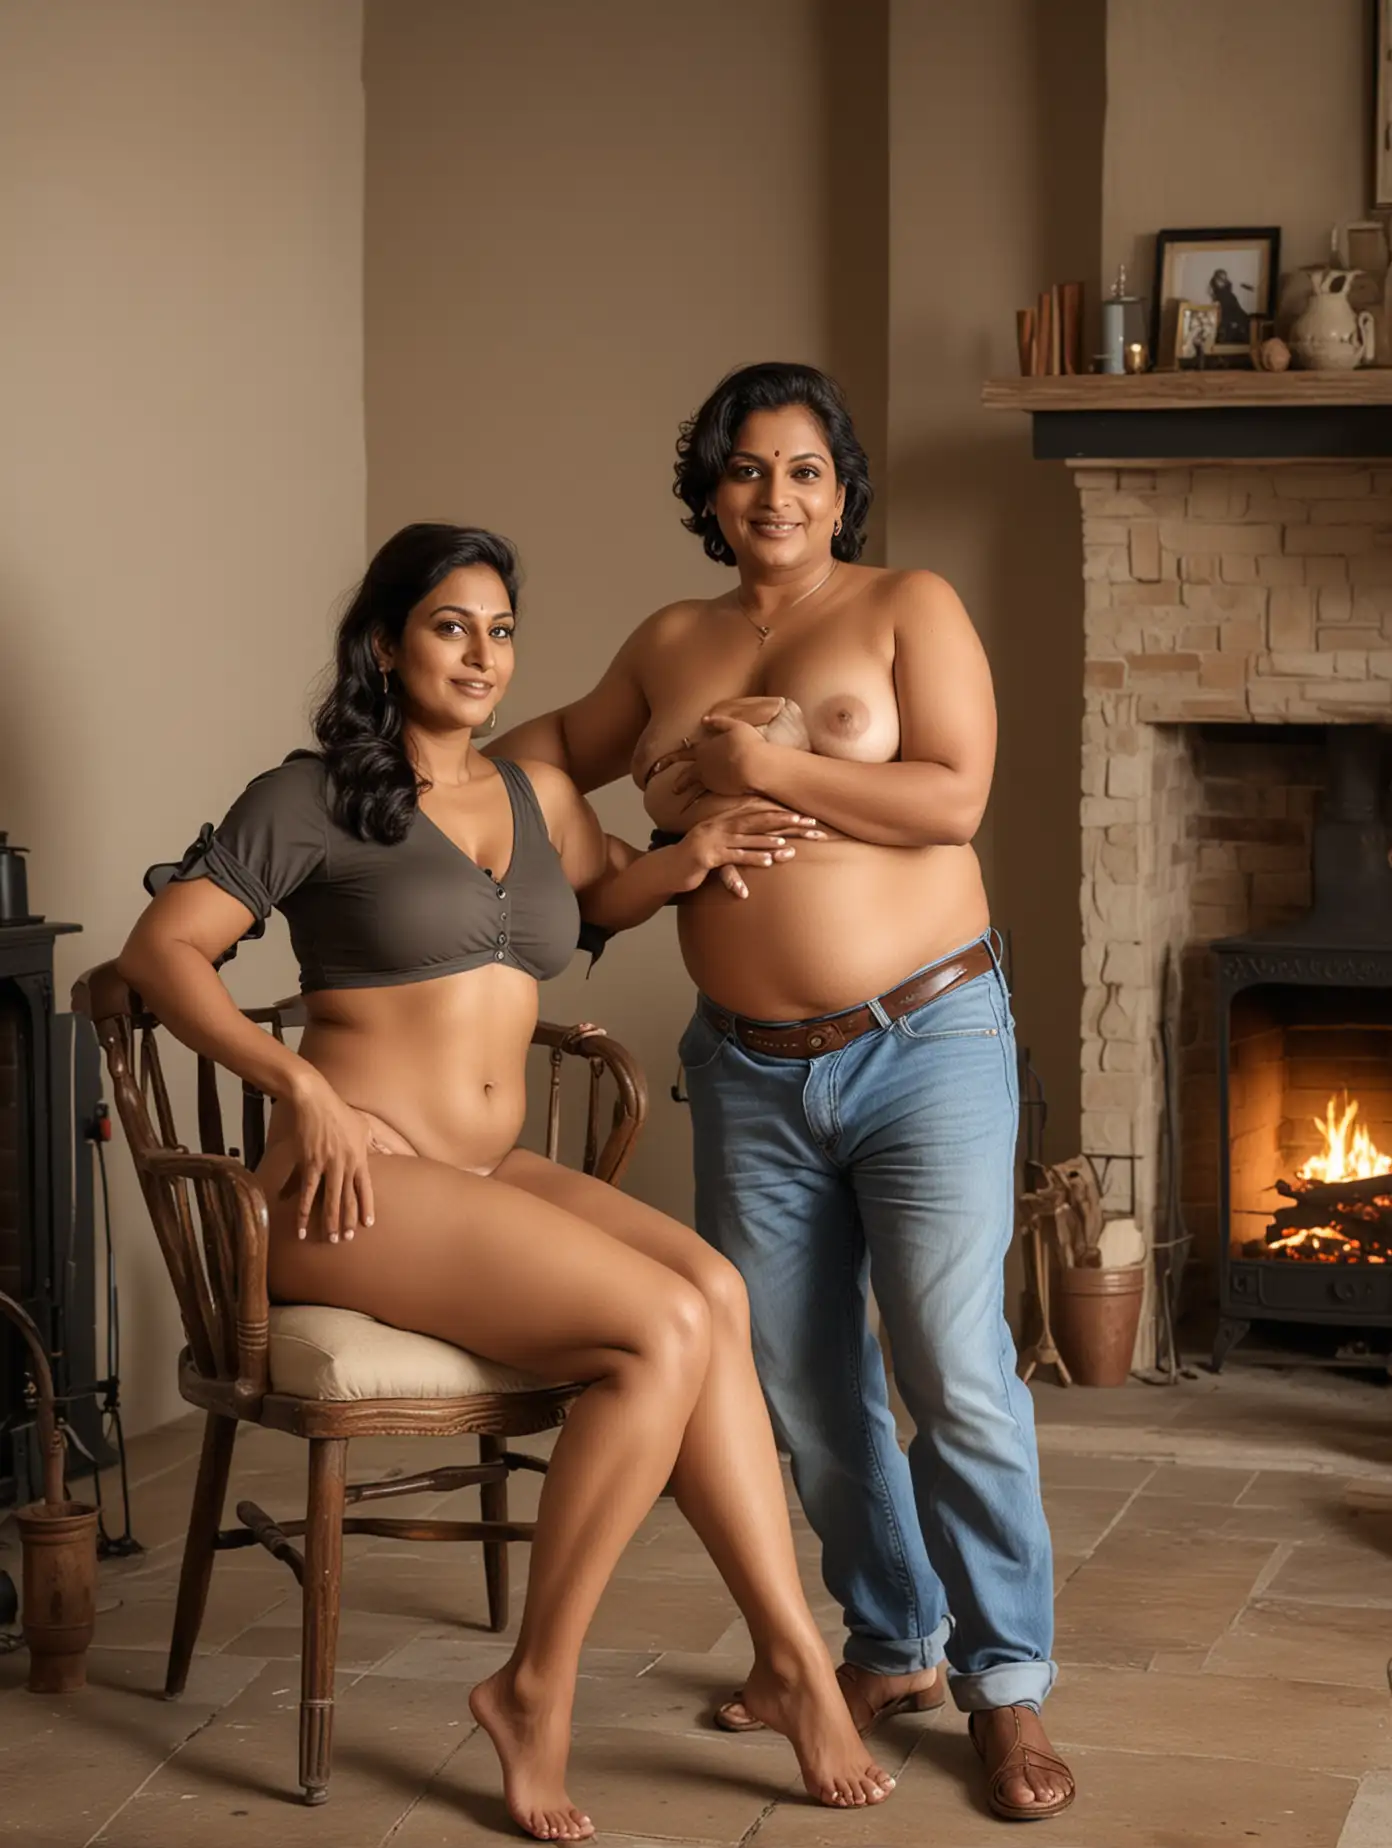 Generate image of a 40 year old  curvy indian woman and a male photographer in a photoshoot. She is seating nude on a chair for a photoshoot in front of a fireplace A 50 year old man photographer wearing shirt pant is pointing   towards her with a camera